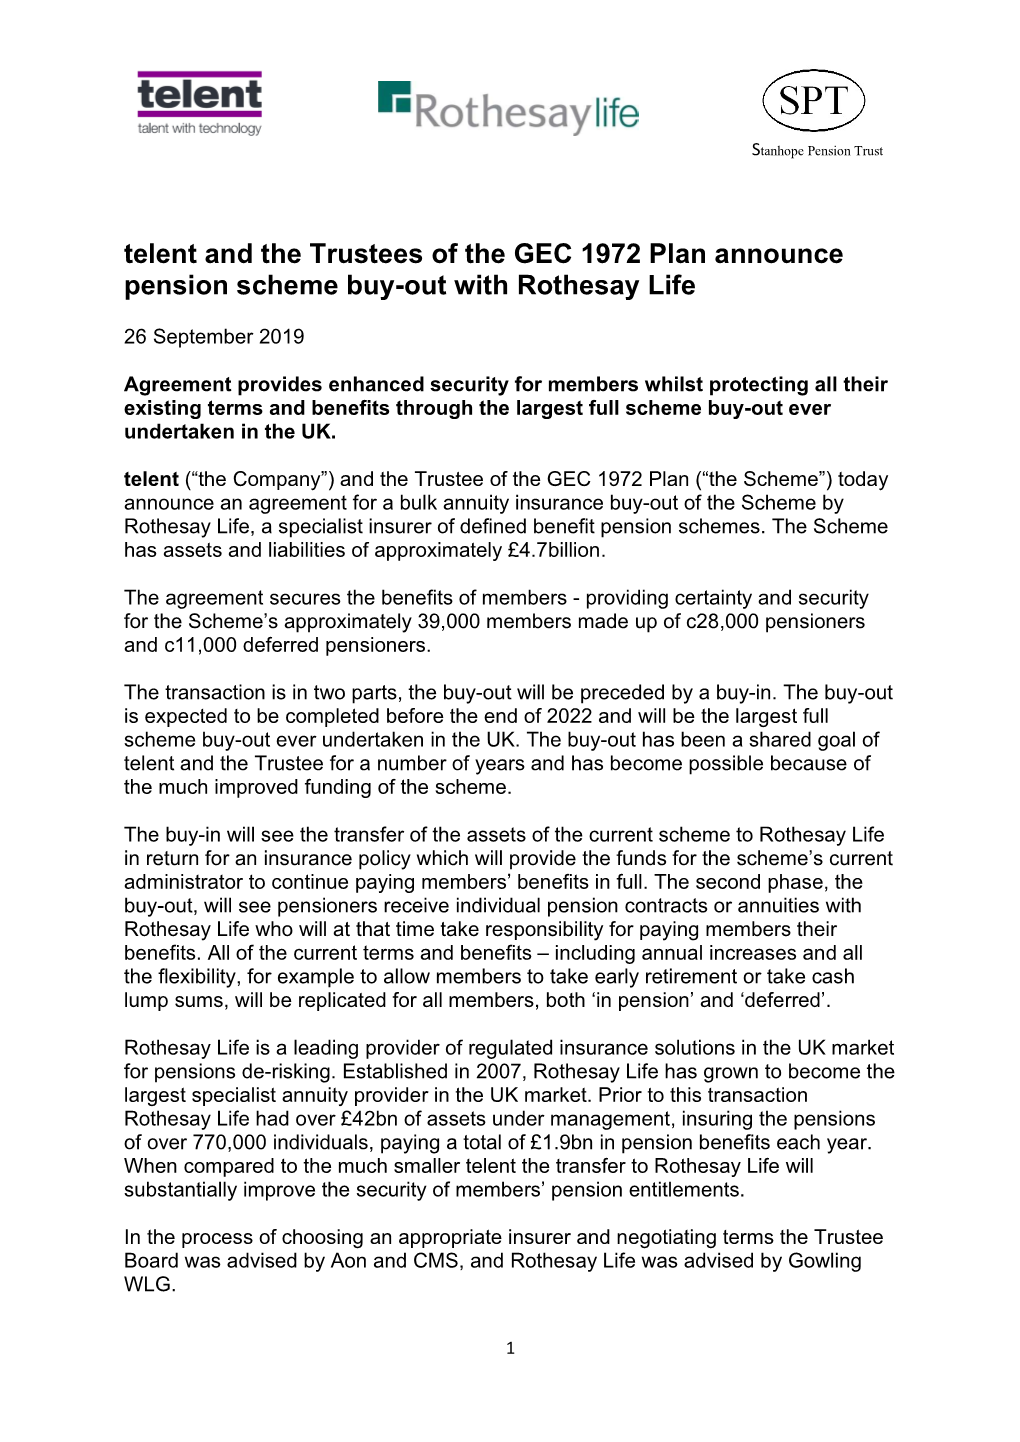 Telent and the Trustees of the GEC 1972 Plan Announce Pension Scheme Buy-Out with Rothesay Life